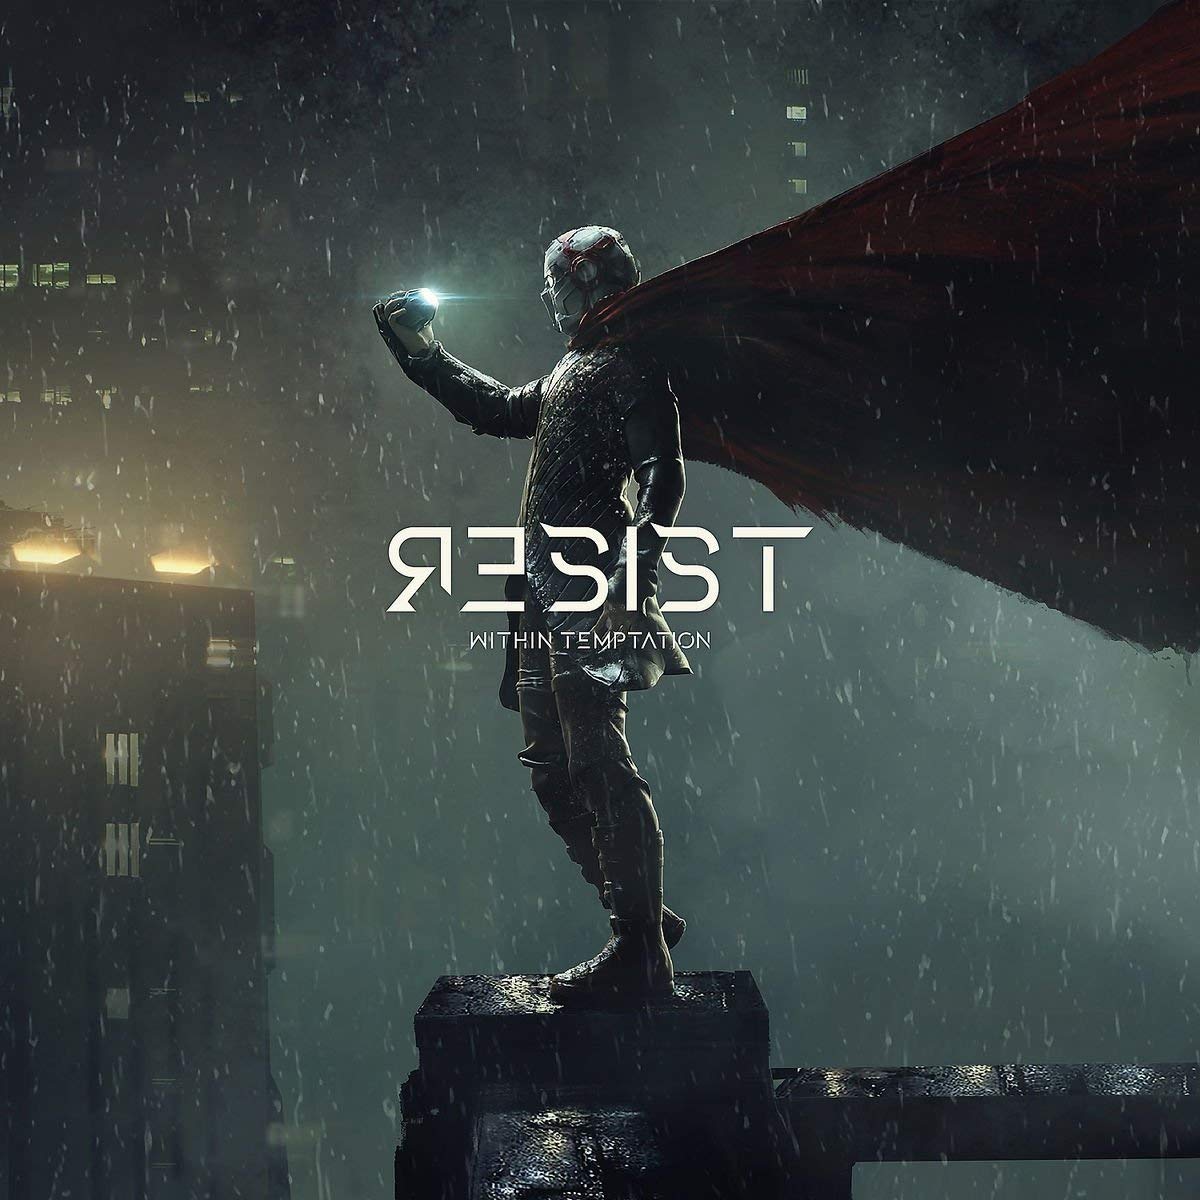 Within Temptation-Resist-(0602577019036)-DELUXE EDITION-2CD-FLAC-2019-WRE Download